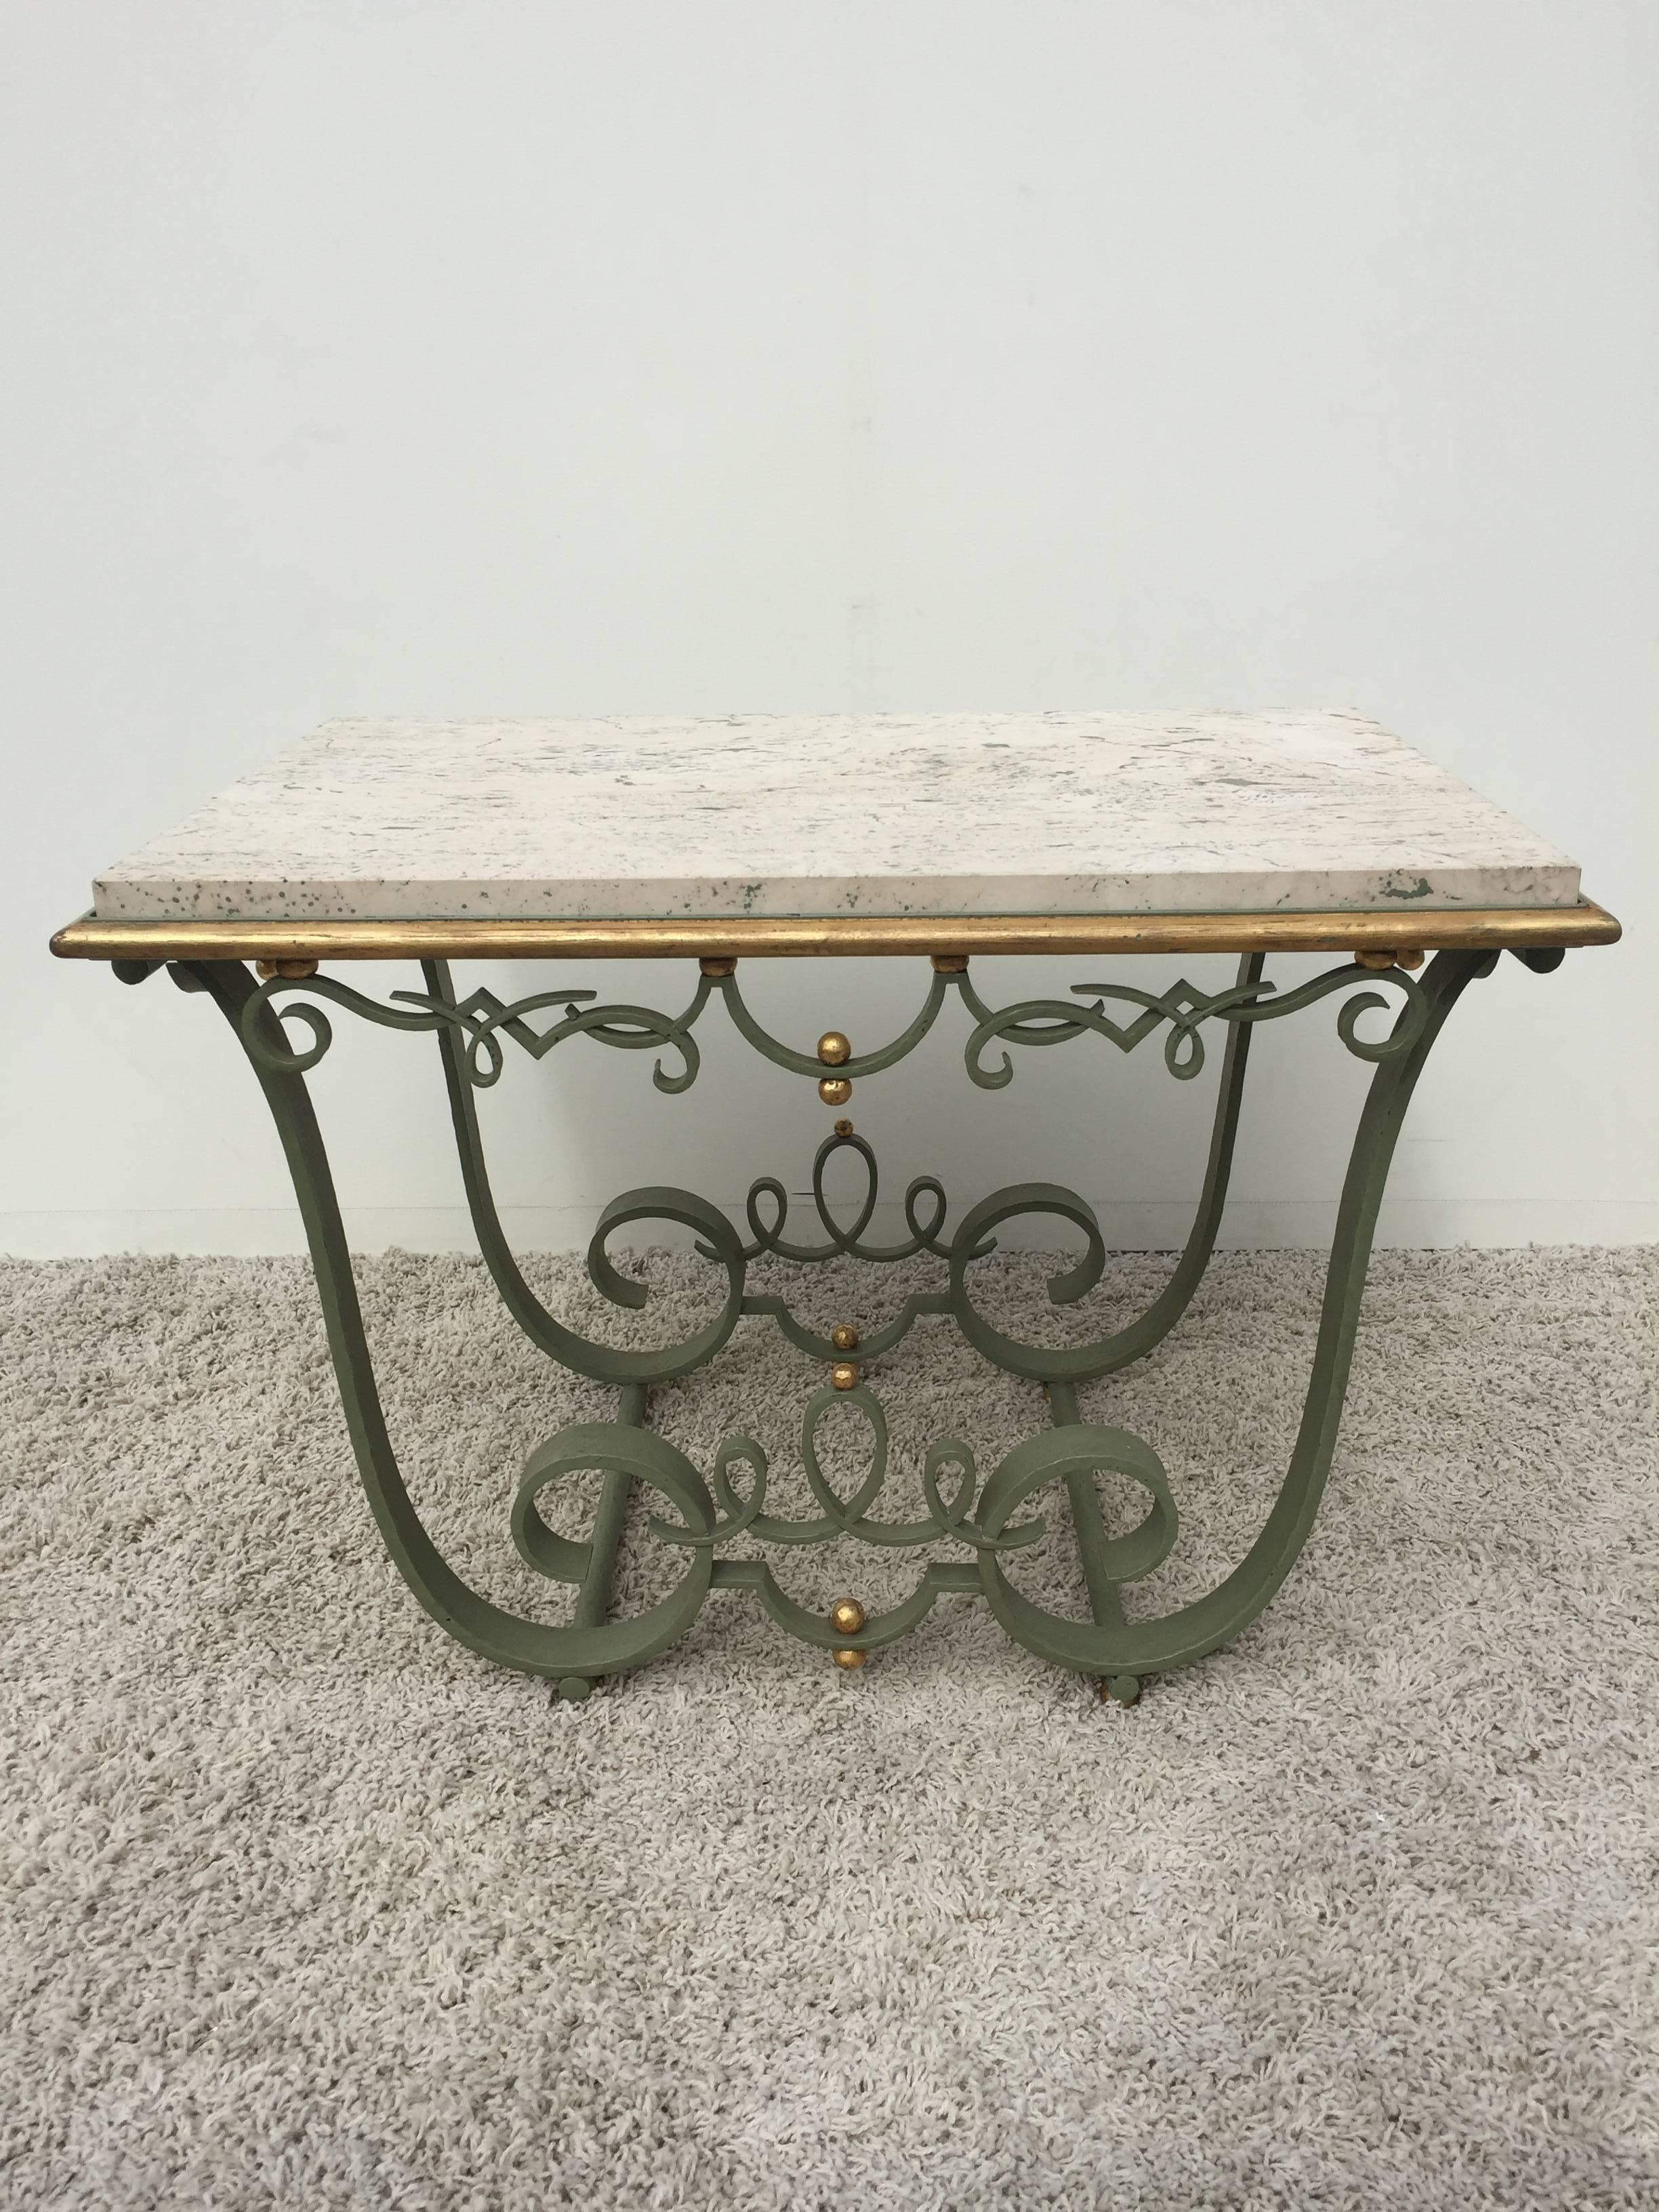 Raymond Subes attributed green and gilt marble top
Table, extremely well made heavy base, with a Travertine marble green patina filling, matching the base.